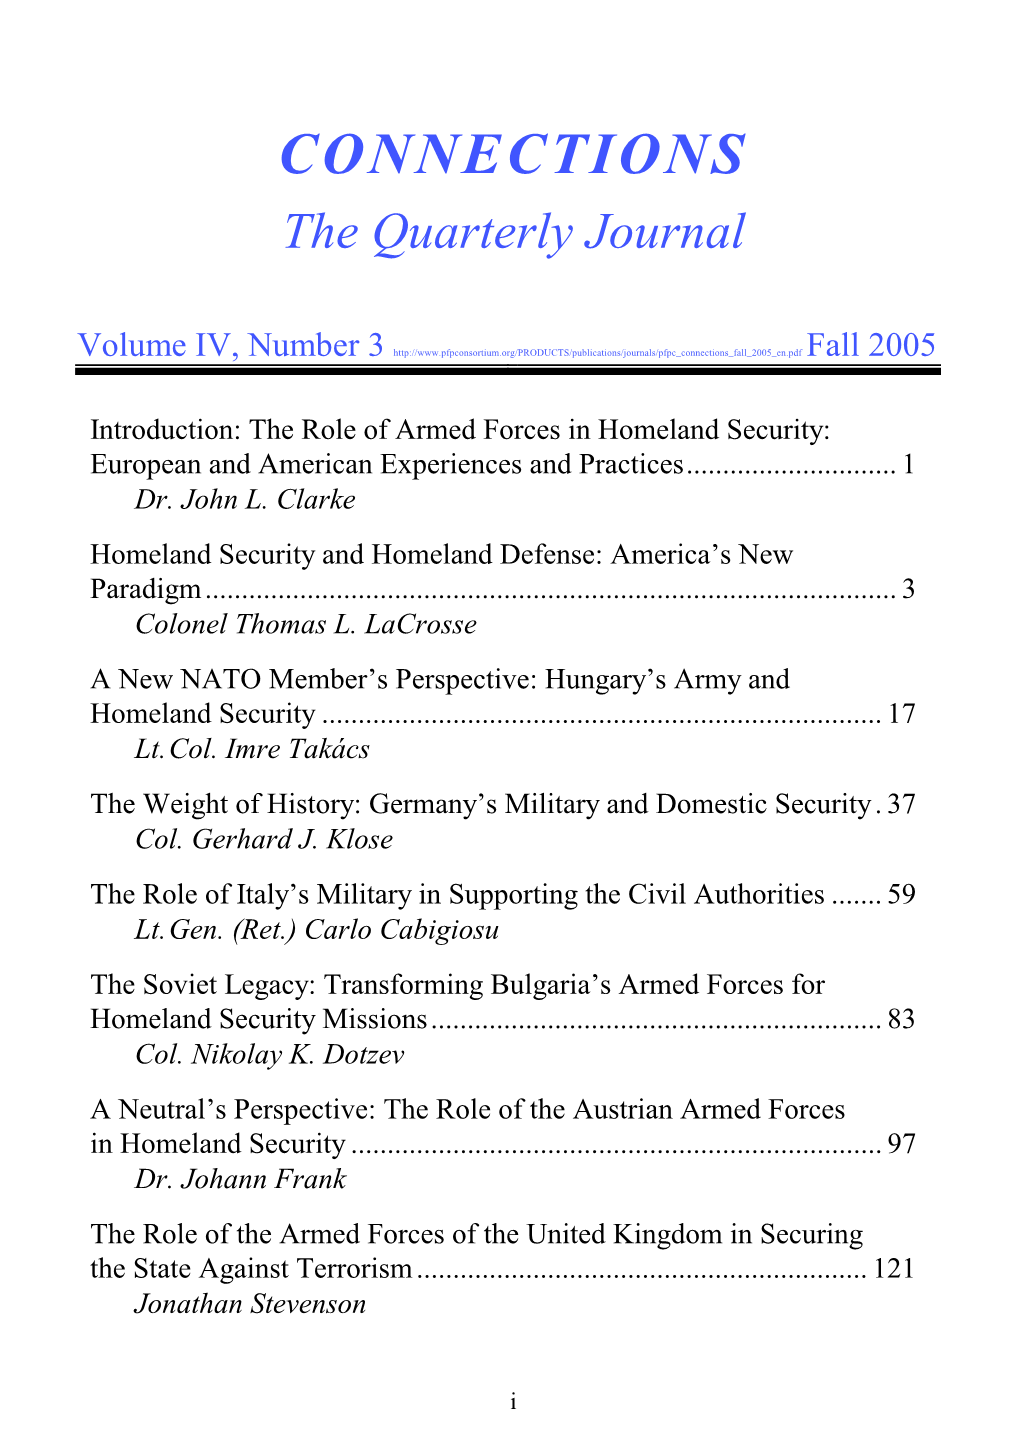 The Role of the Austrian Armed Forces in Homeland Security